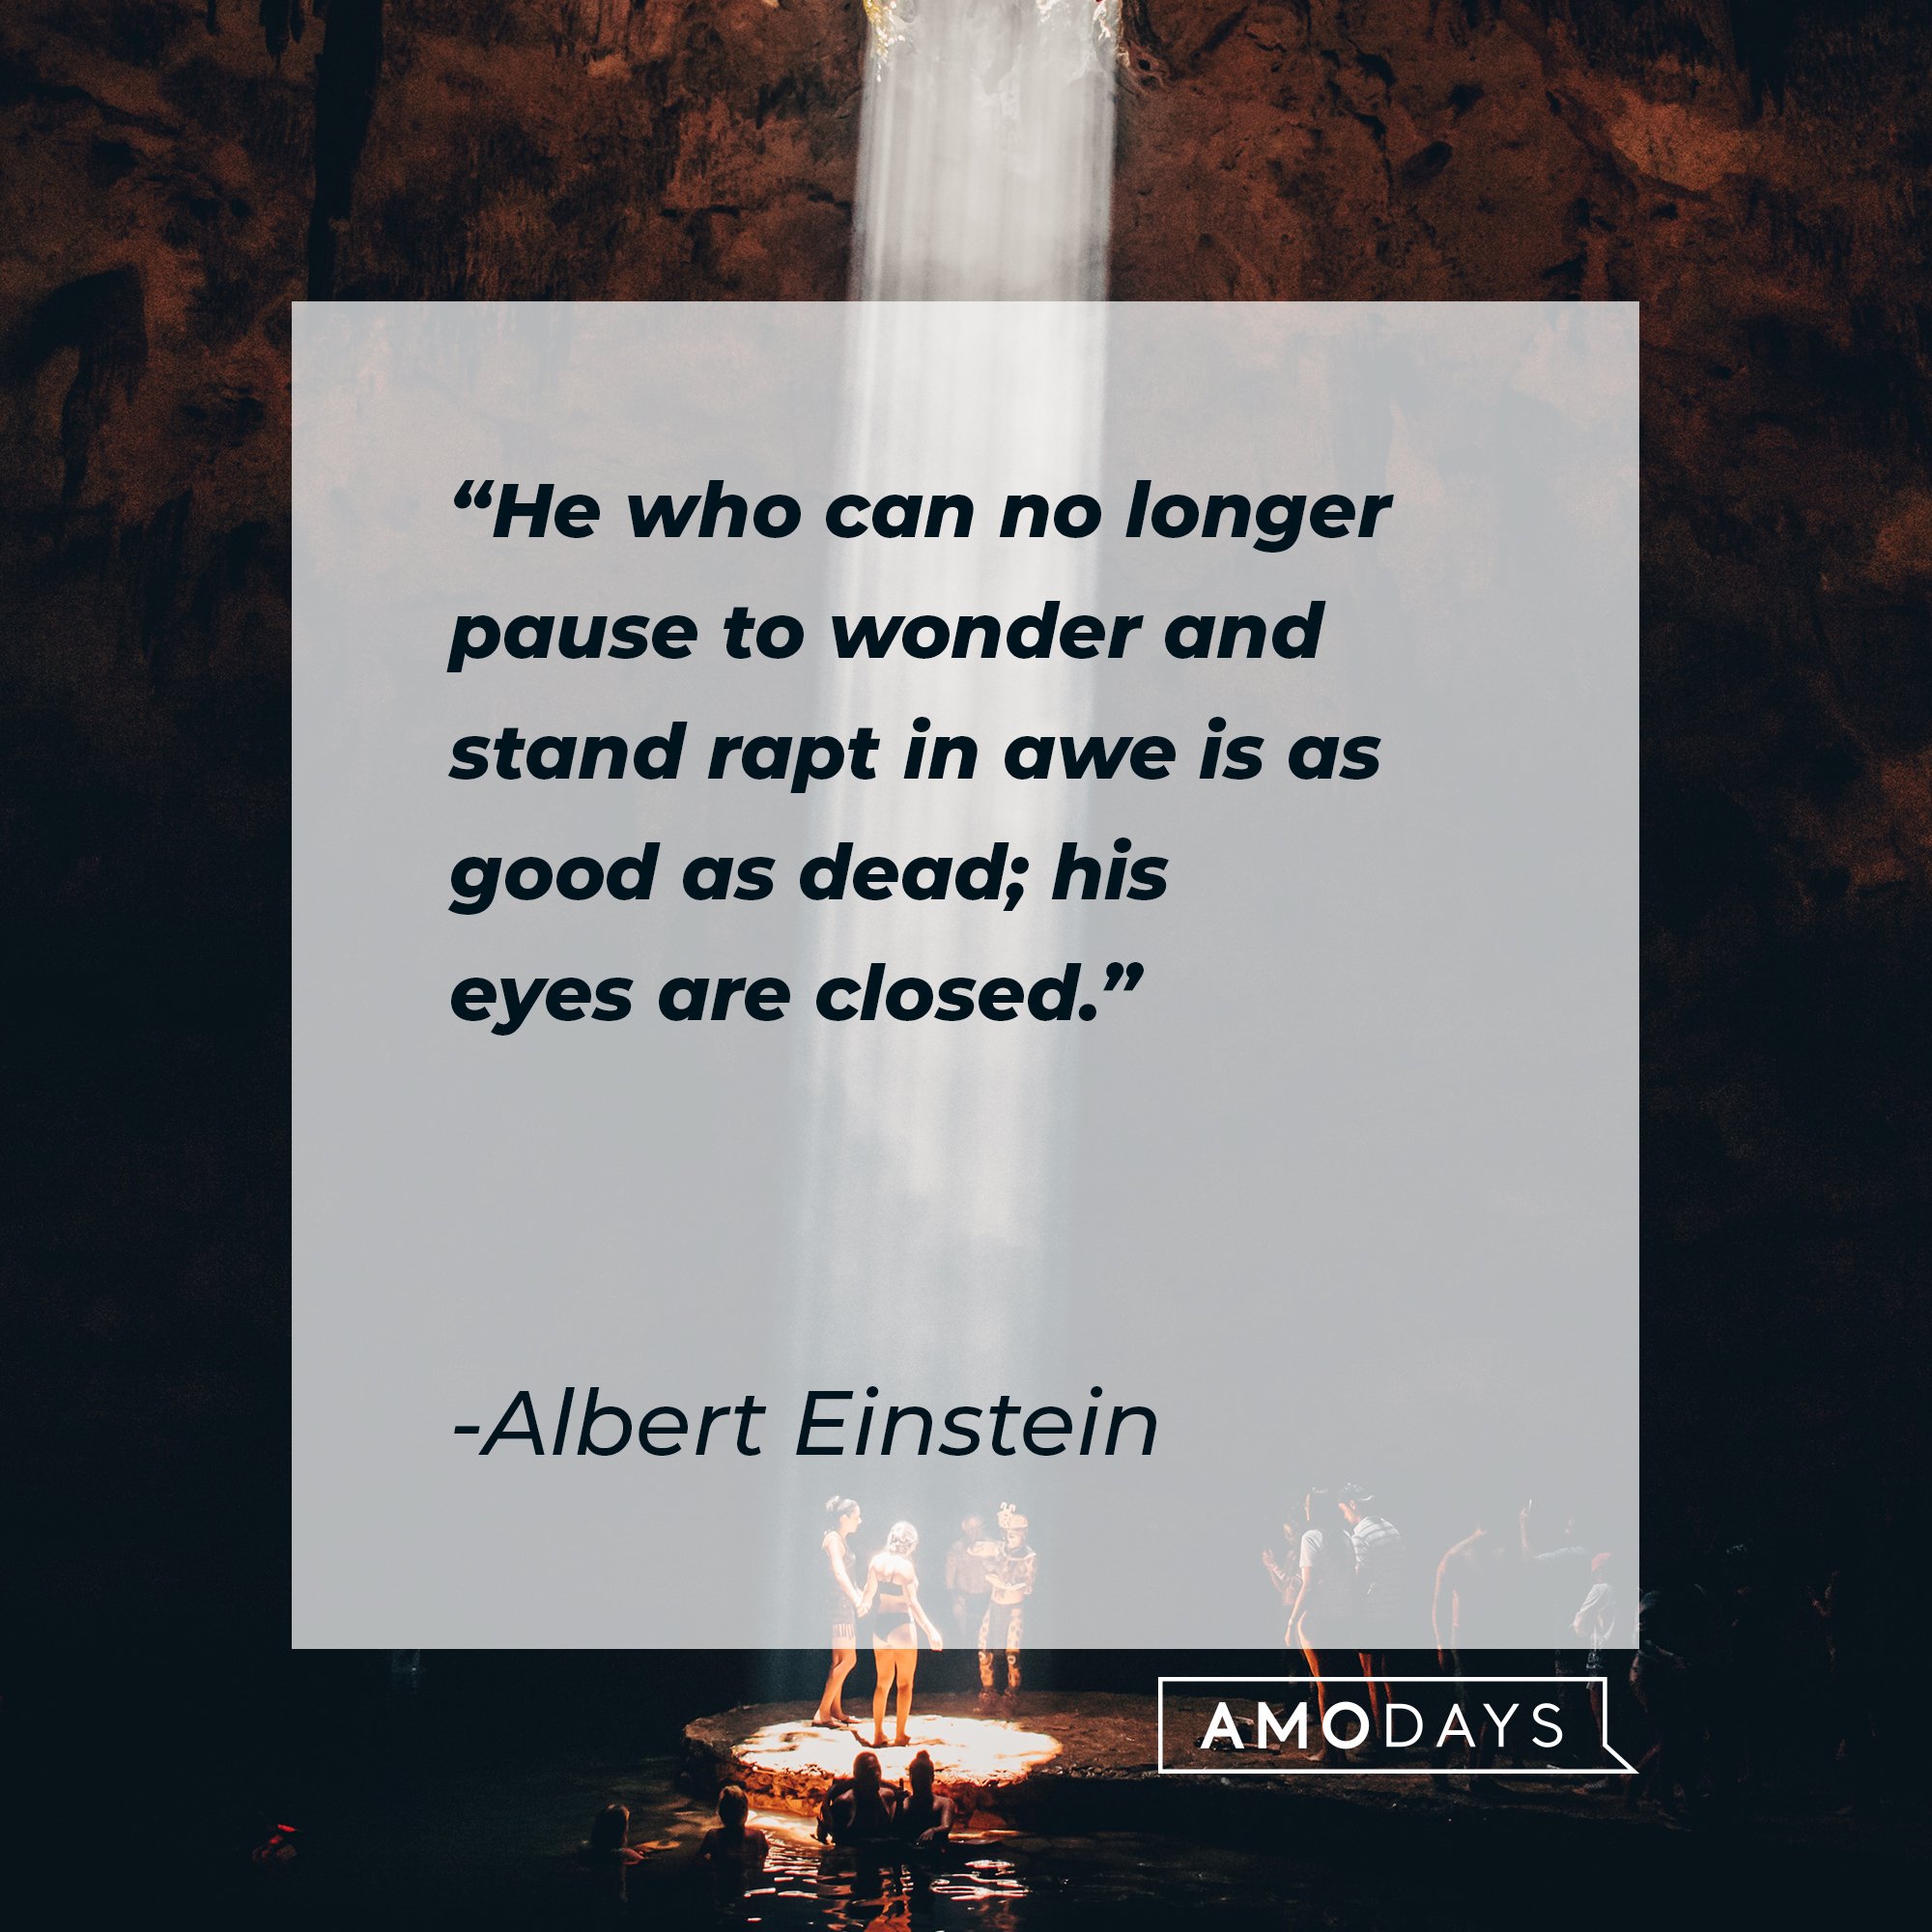 Albert Einstein’s quote: "He who can no longer pause to wonder and stand rapt in awe is as good as dead; his eyes are closed." |  Image: AmoDays